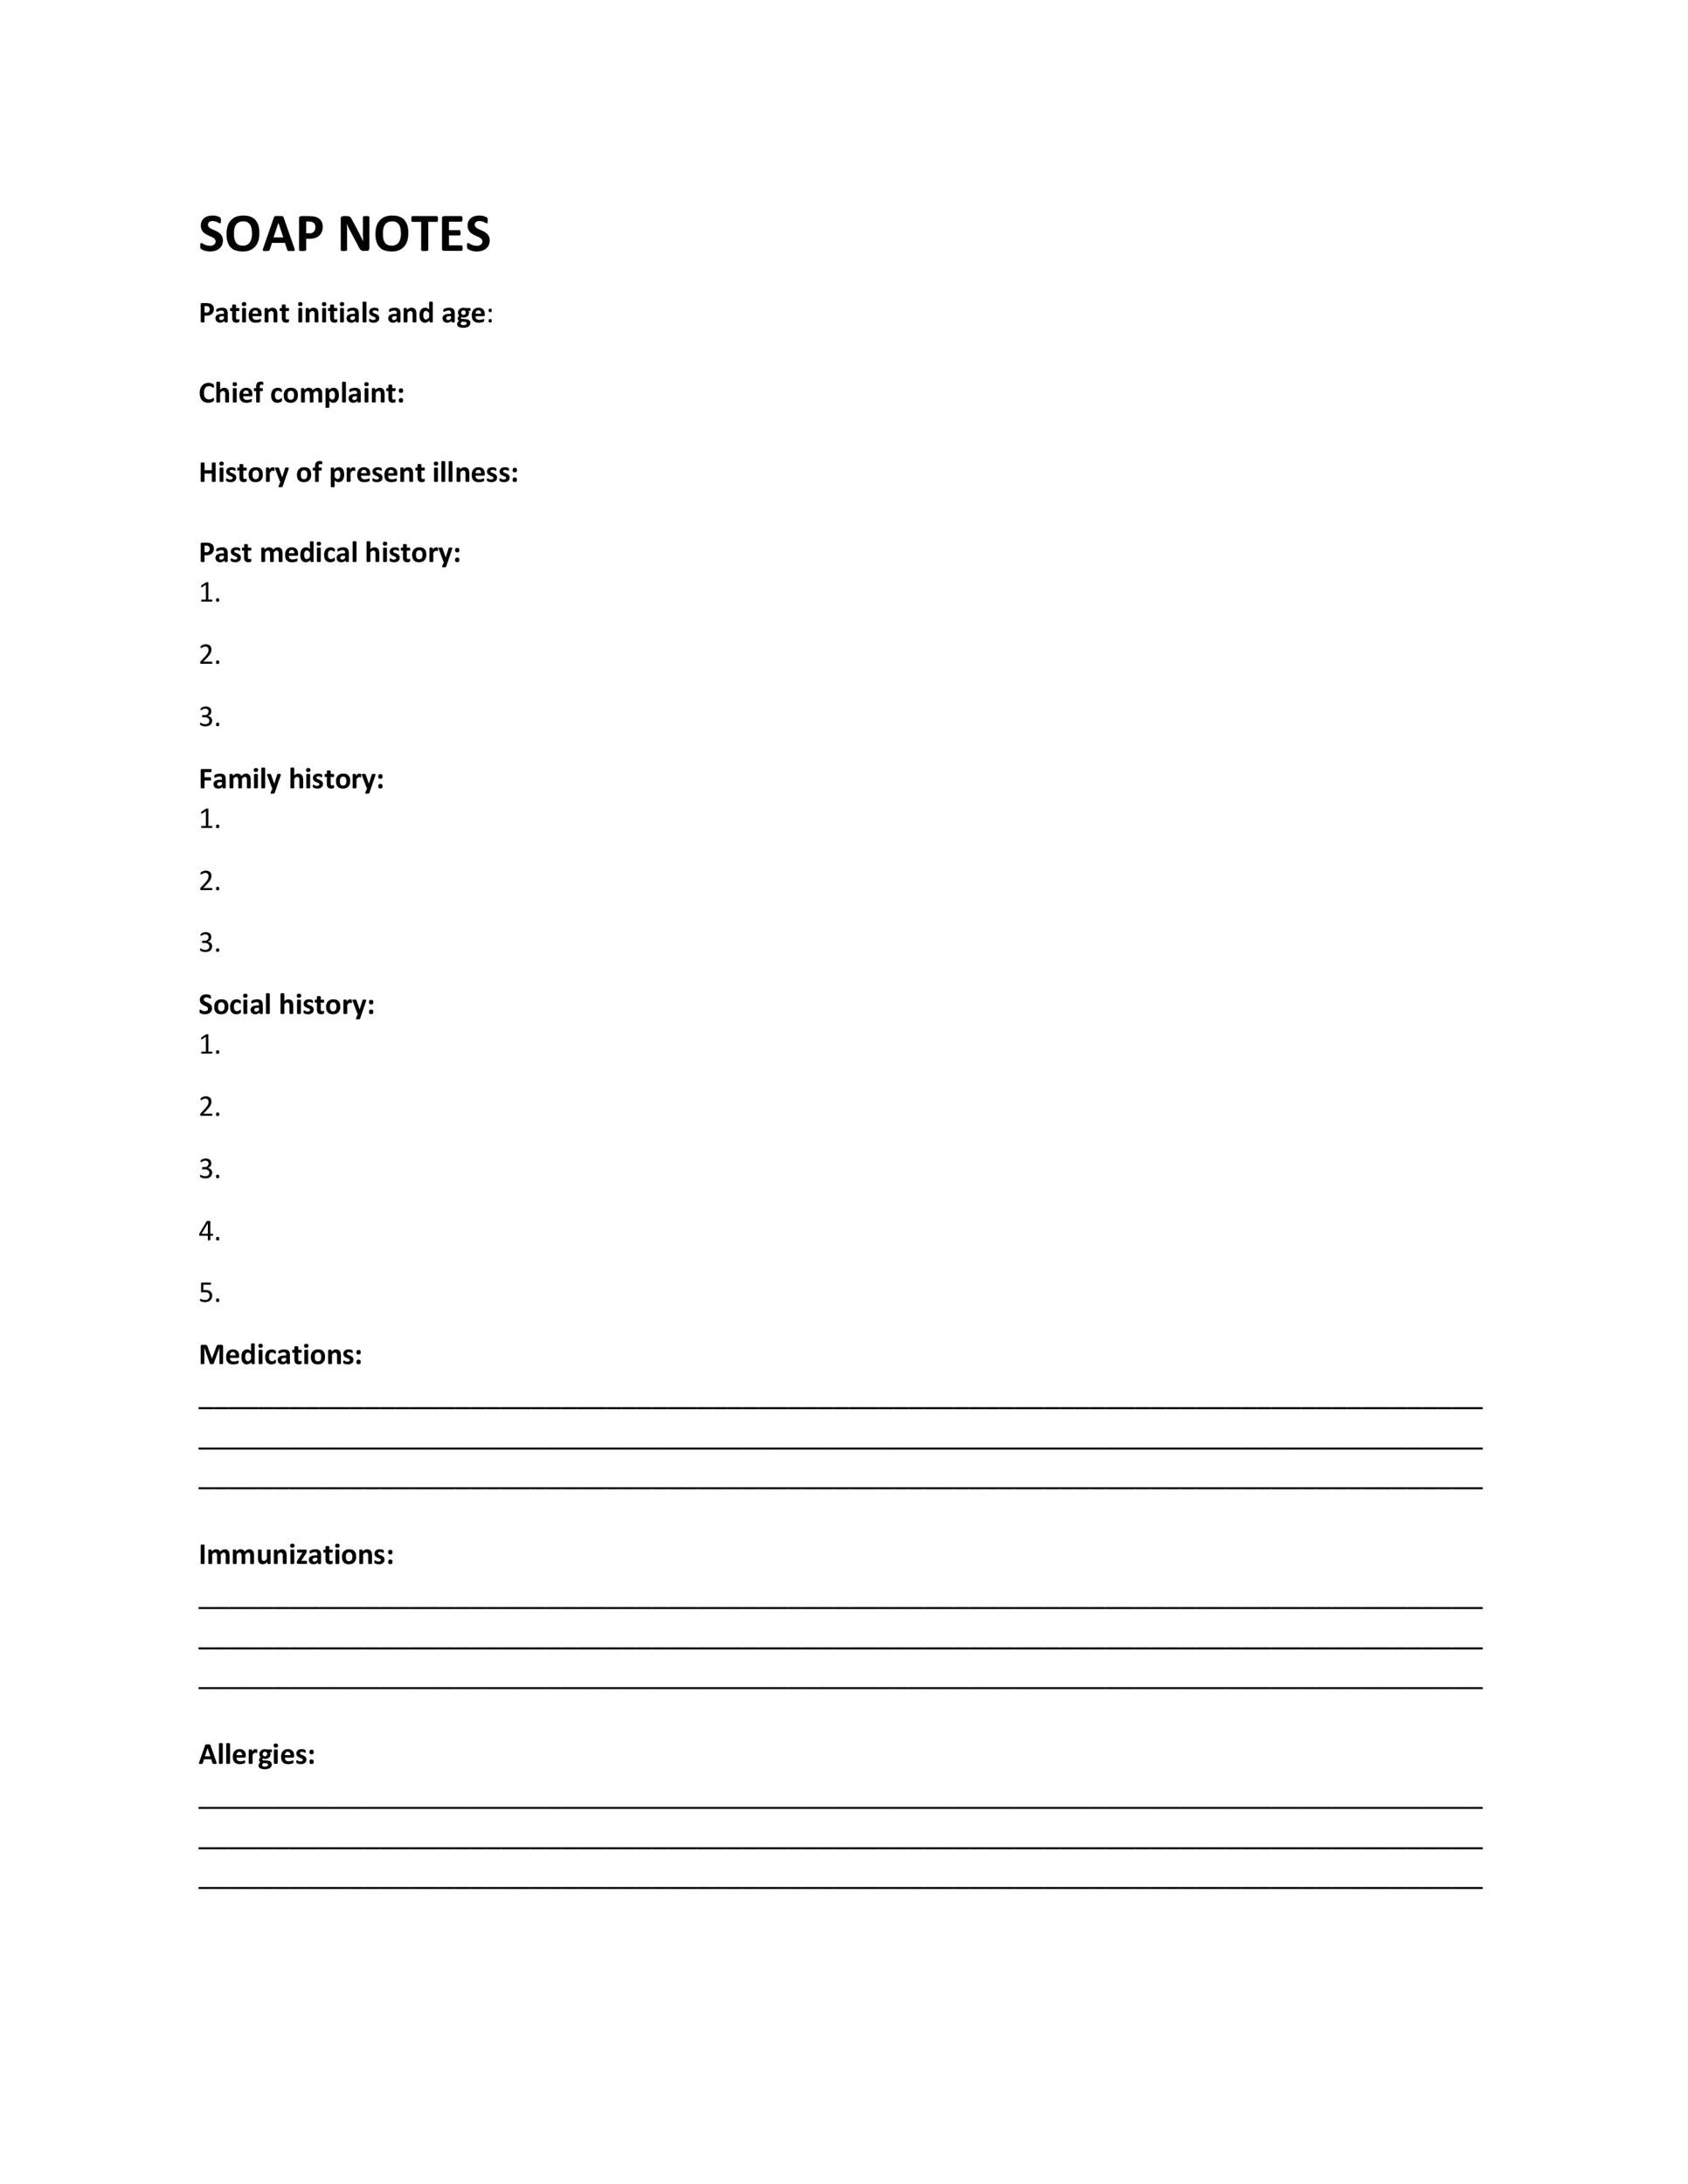 Free Soap Note Template 33